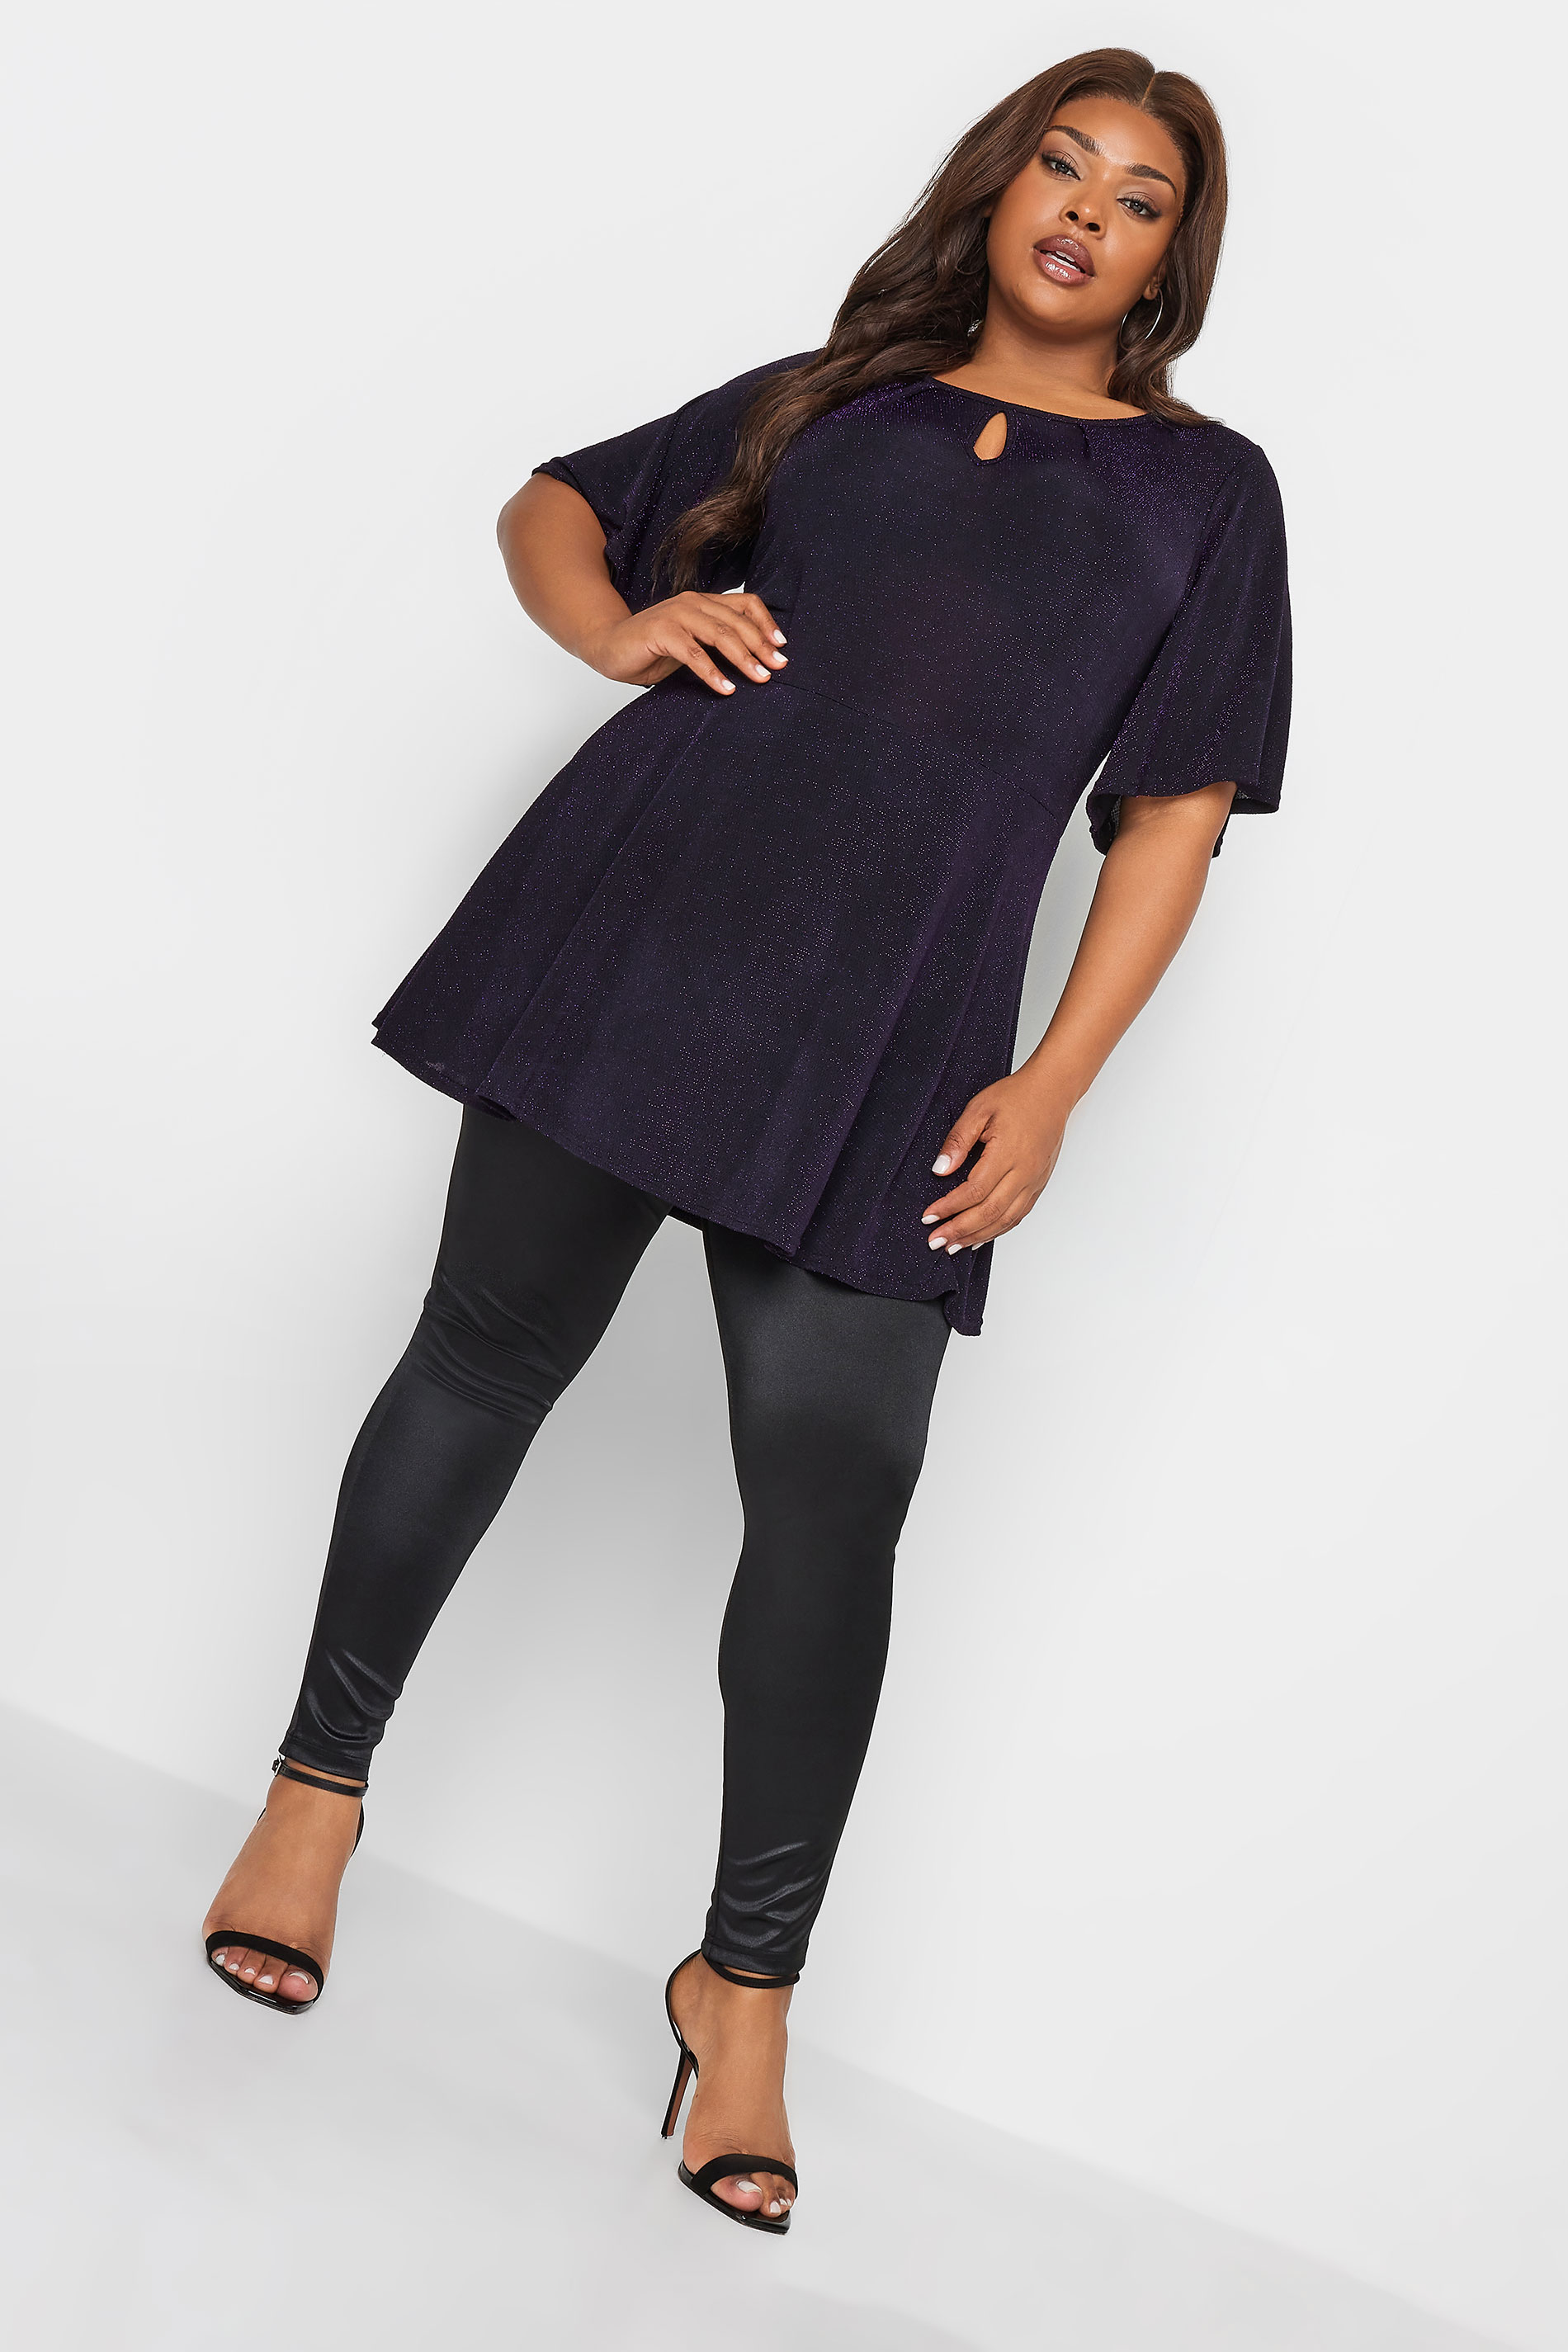 Lavender peplum top with bootcut pants